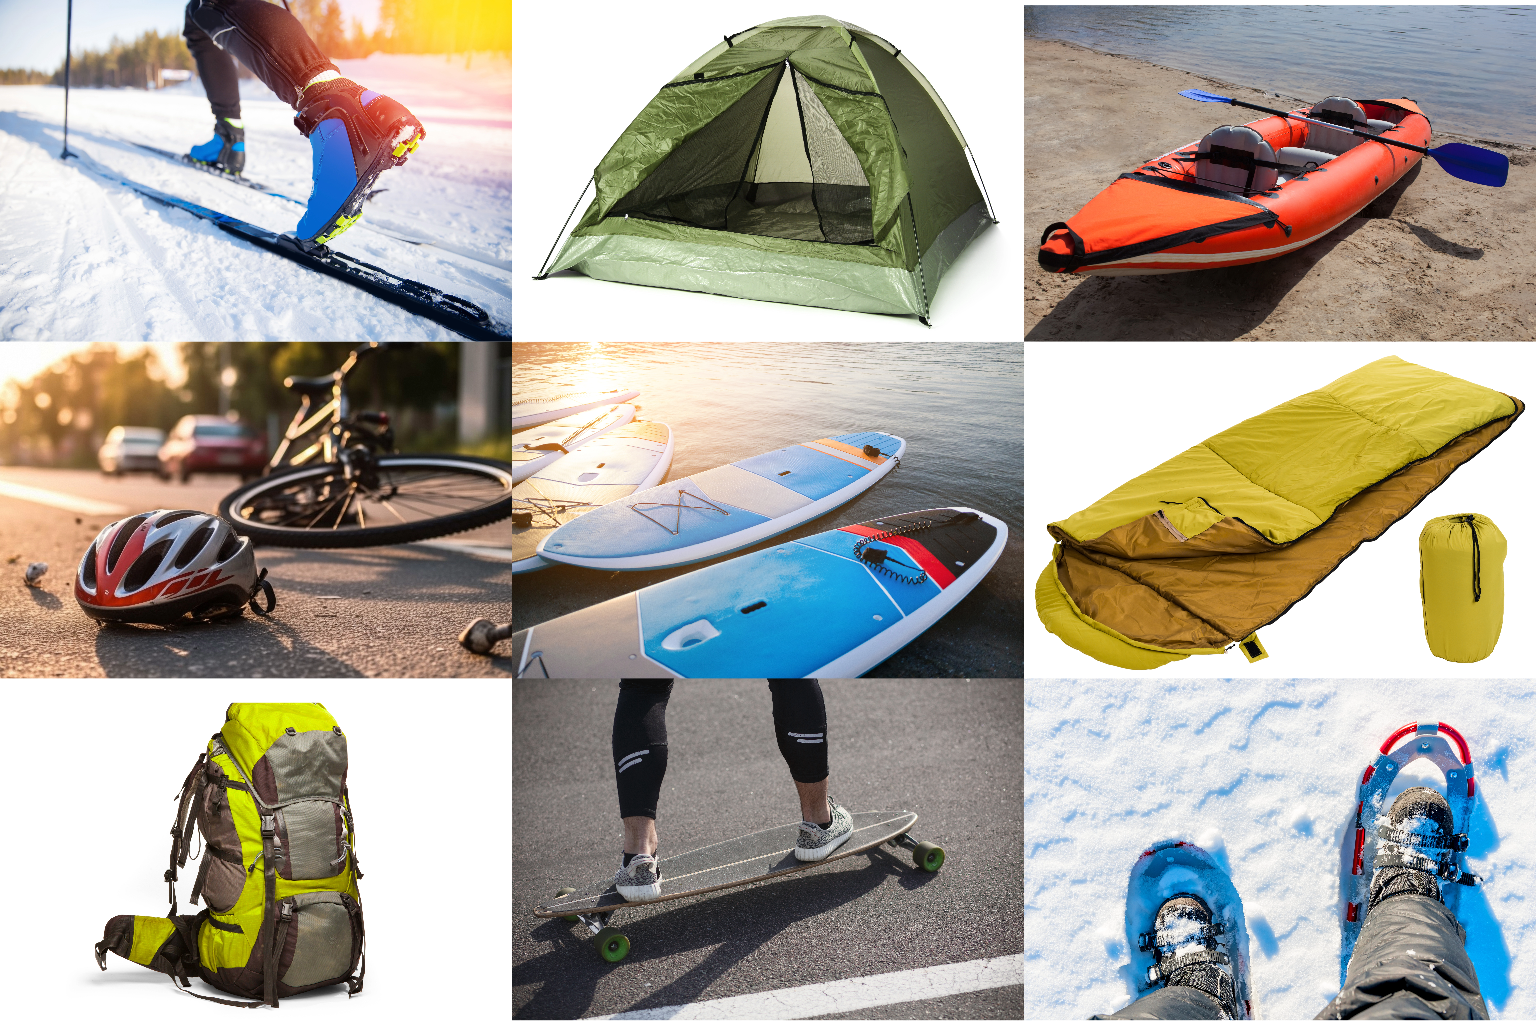 cross country skis, green tent, orange inflatable kayak, helmet and bike on the ground, stand up paddle boards floating in water, a yellow sleeping bag, a yellow backpack, someone riding a longboard, and blue snowshoes on snow